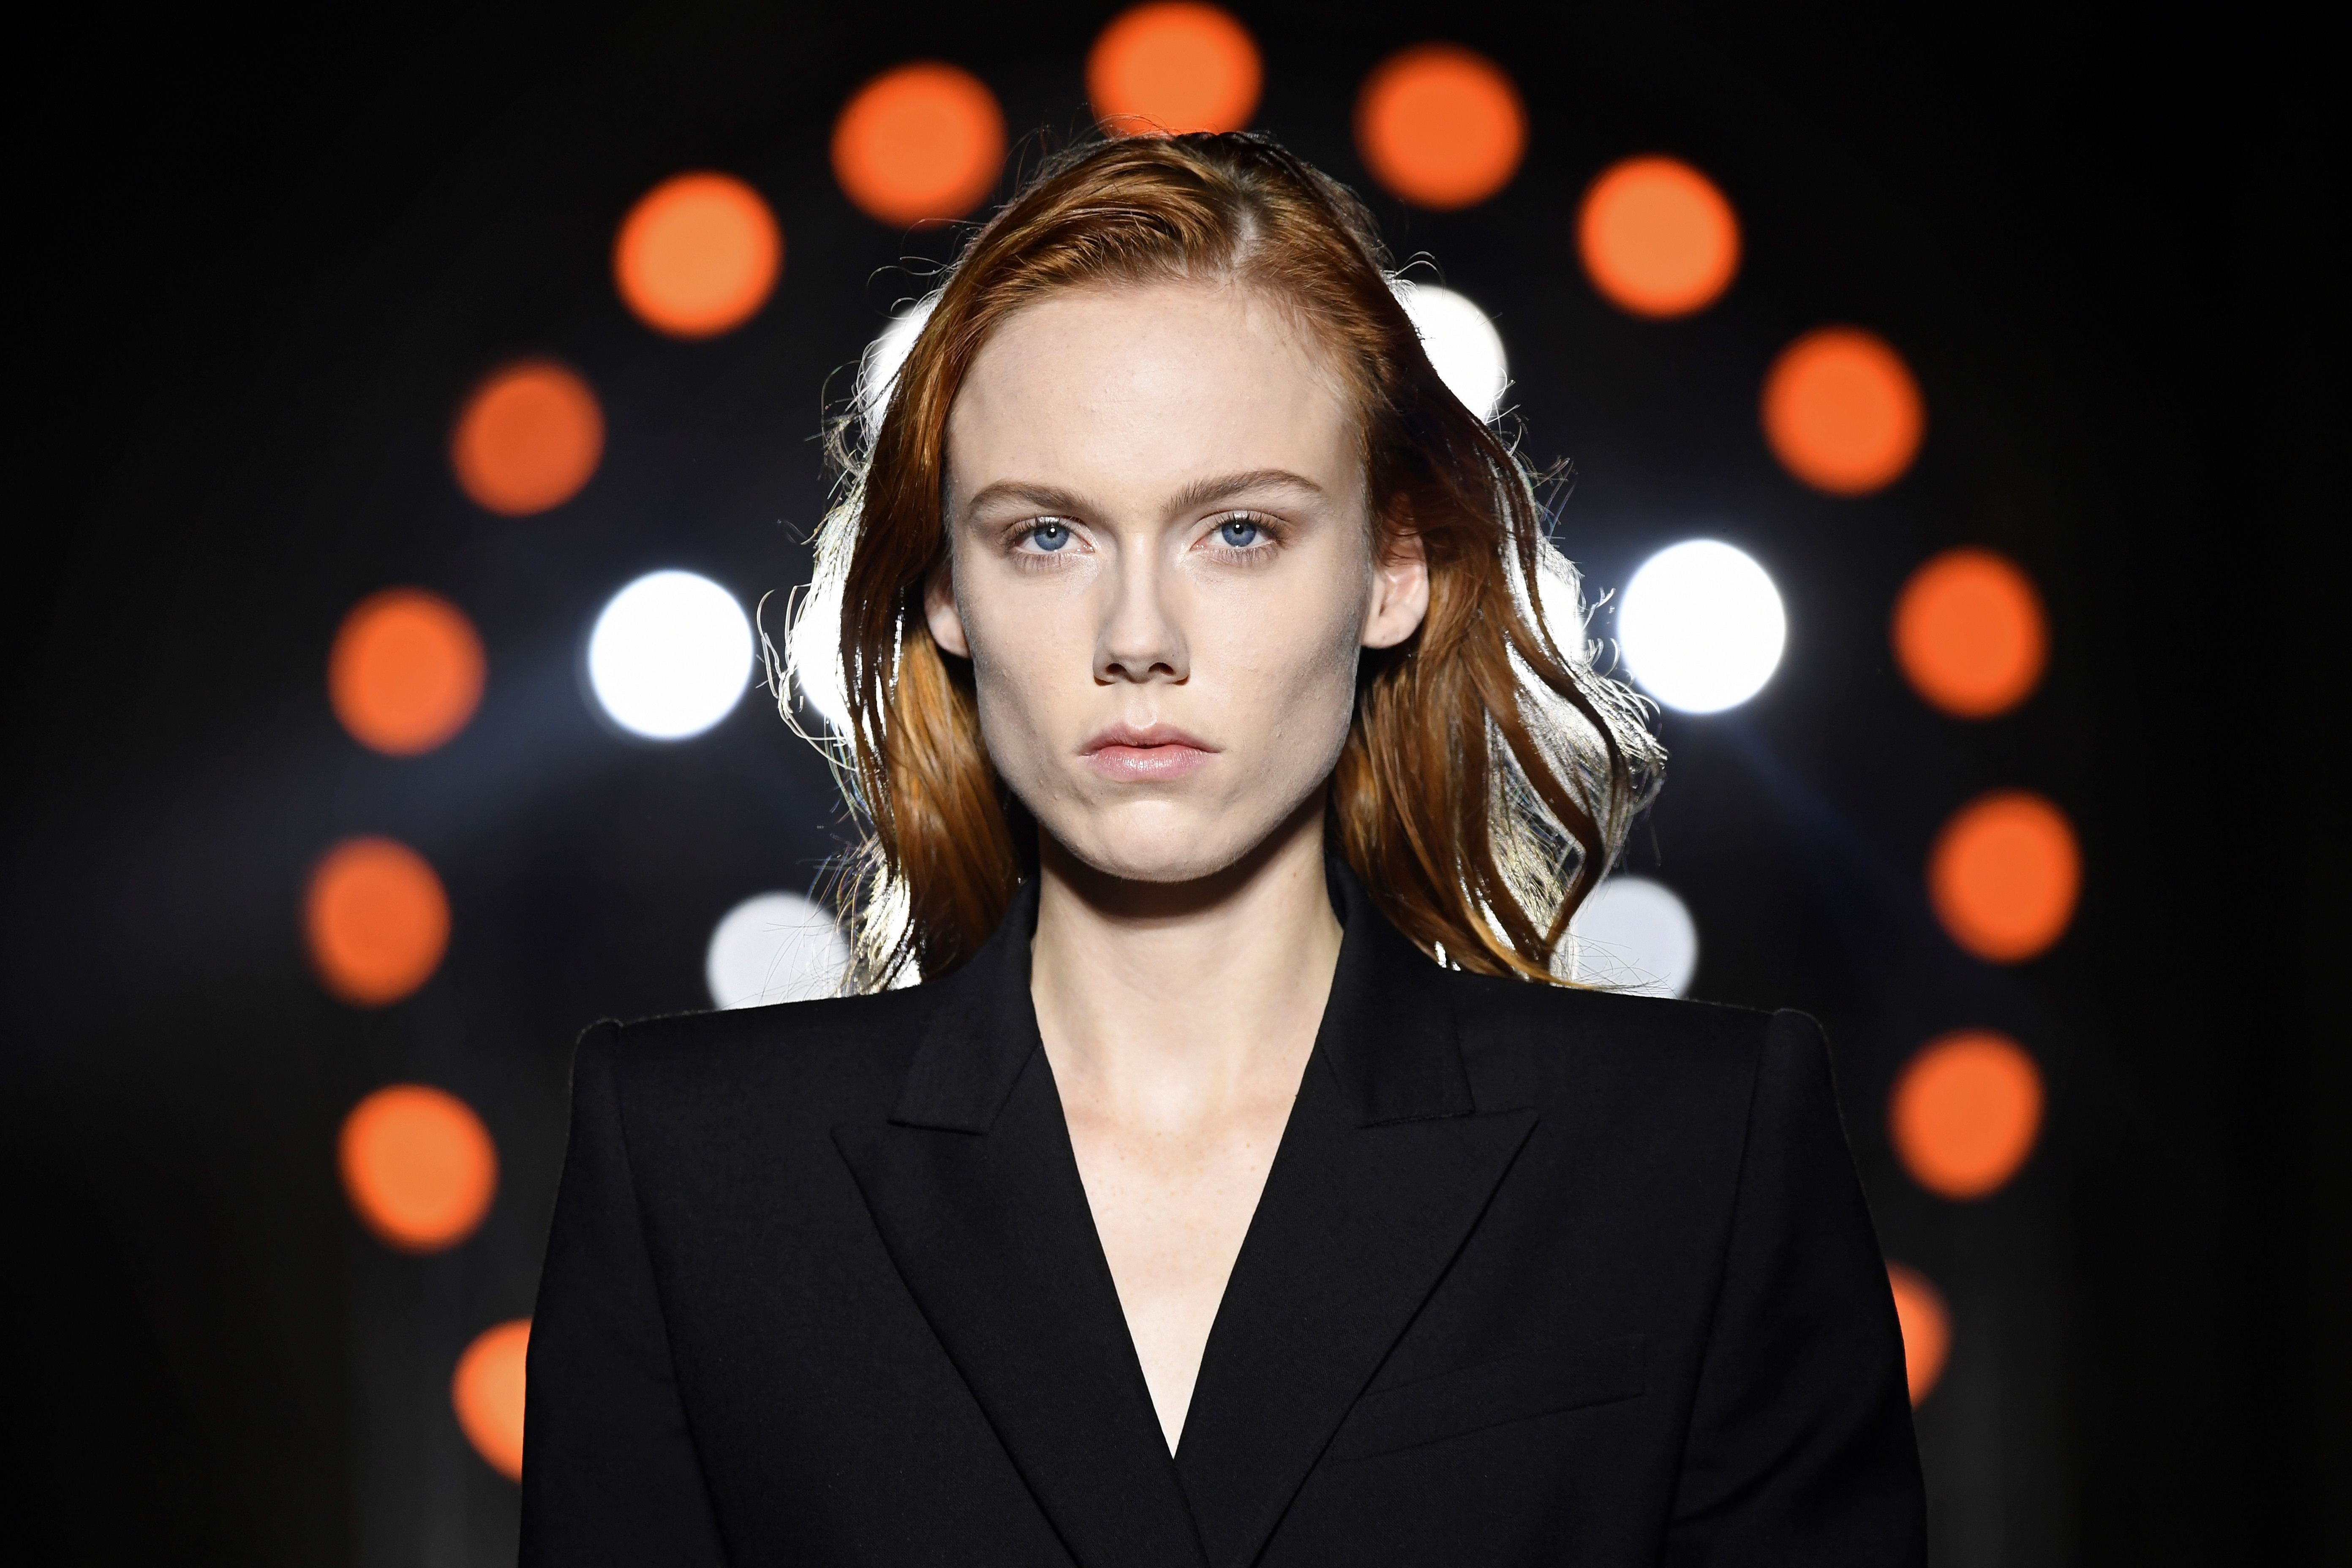 A model presents a creation by Givenchy, during the 2018 spring/summer ready-to-wear collection fashion show in Paris. Photo: AFP